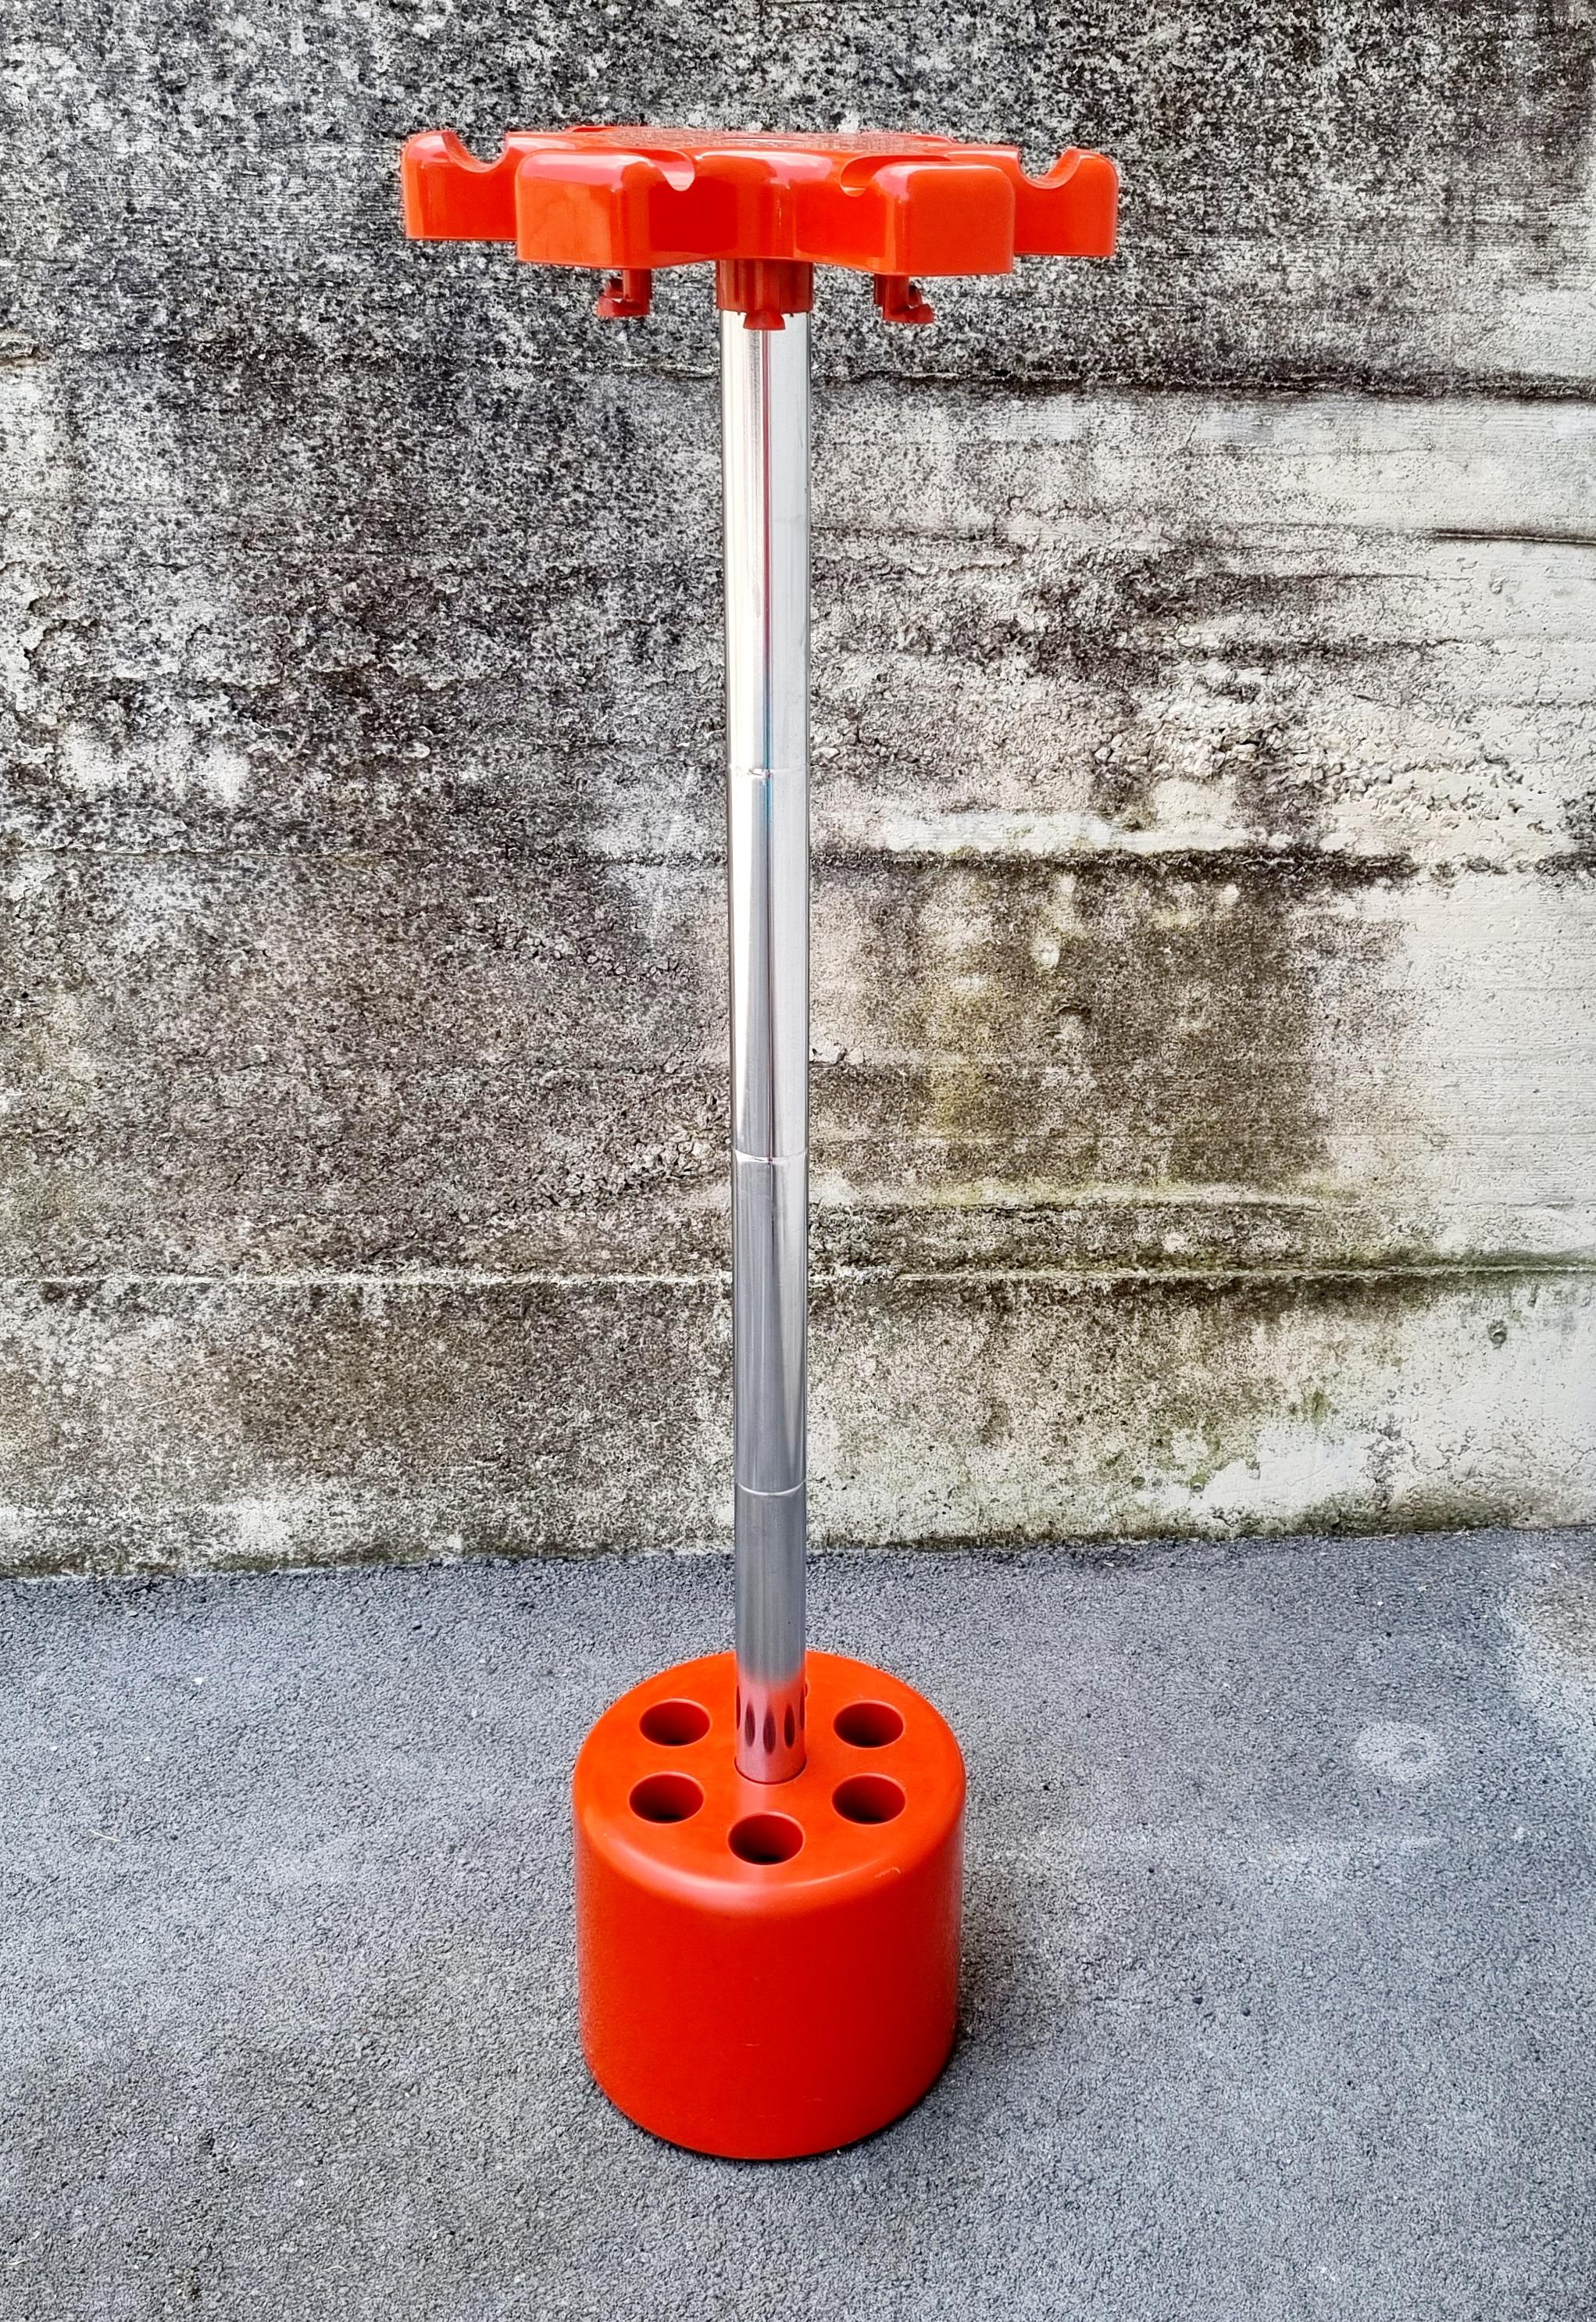 Mid Century combined clothing hanger and umbrella stand was designed by Roberto Lucci and Paolo Orlandini. It was produced by Velca Milano Italy.

Model VIP.

Stand is in very good vintage condition. Designers piece and ready for people with good